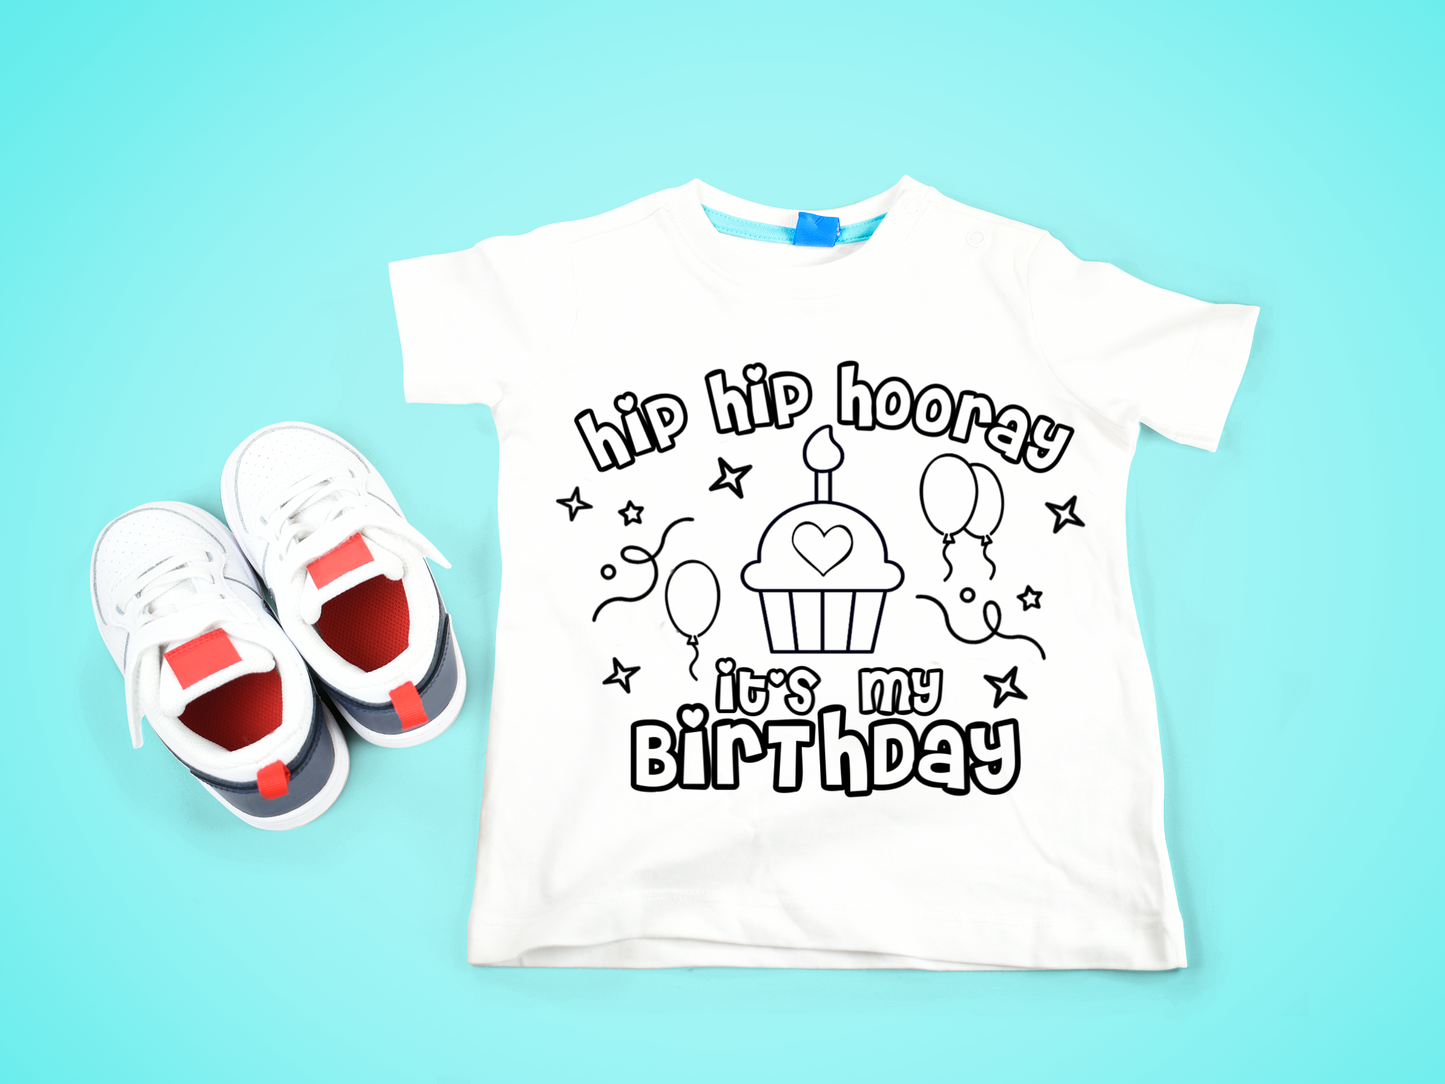 It’s my birthday colour your own t-shirt